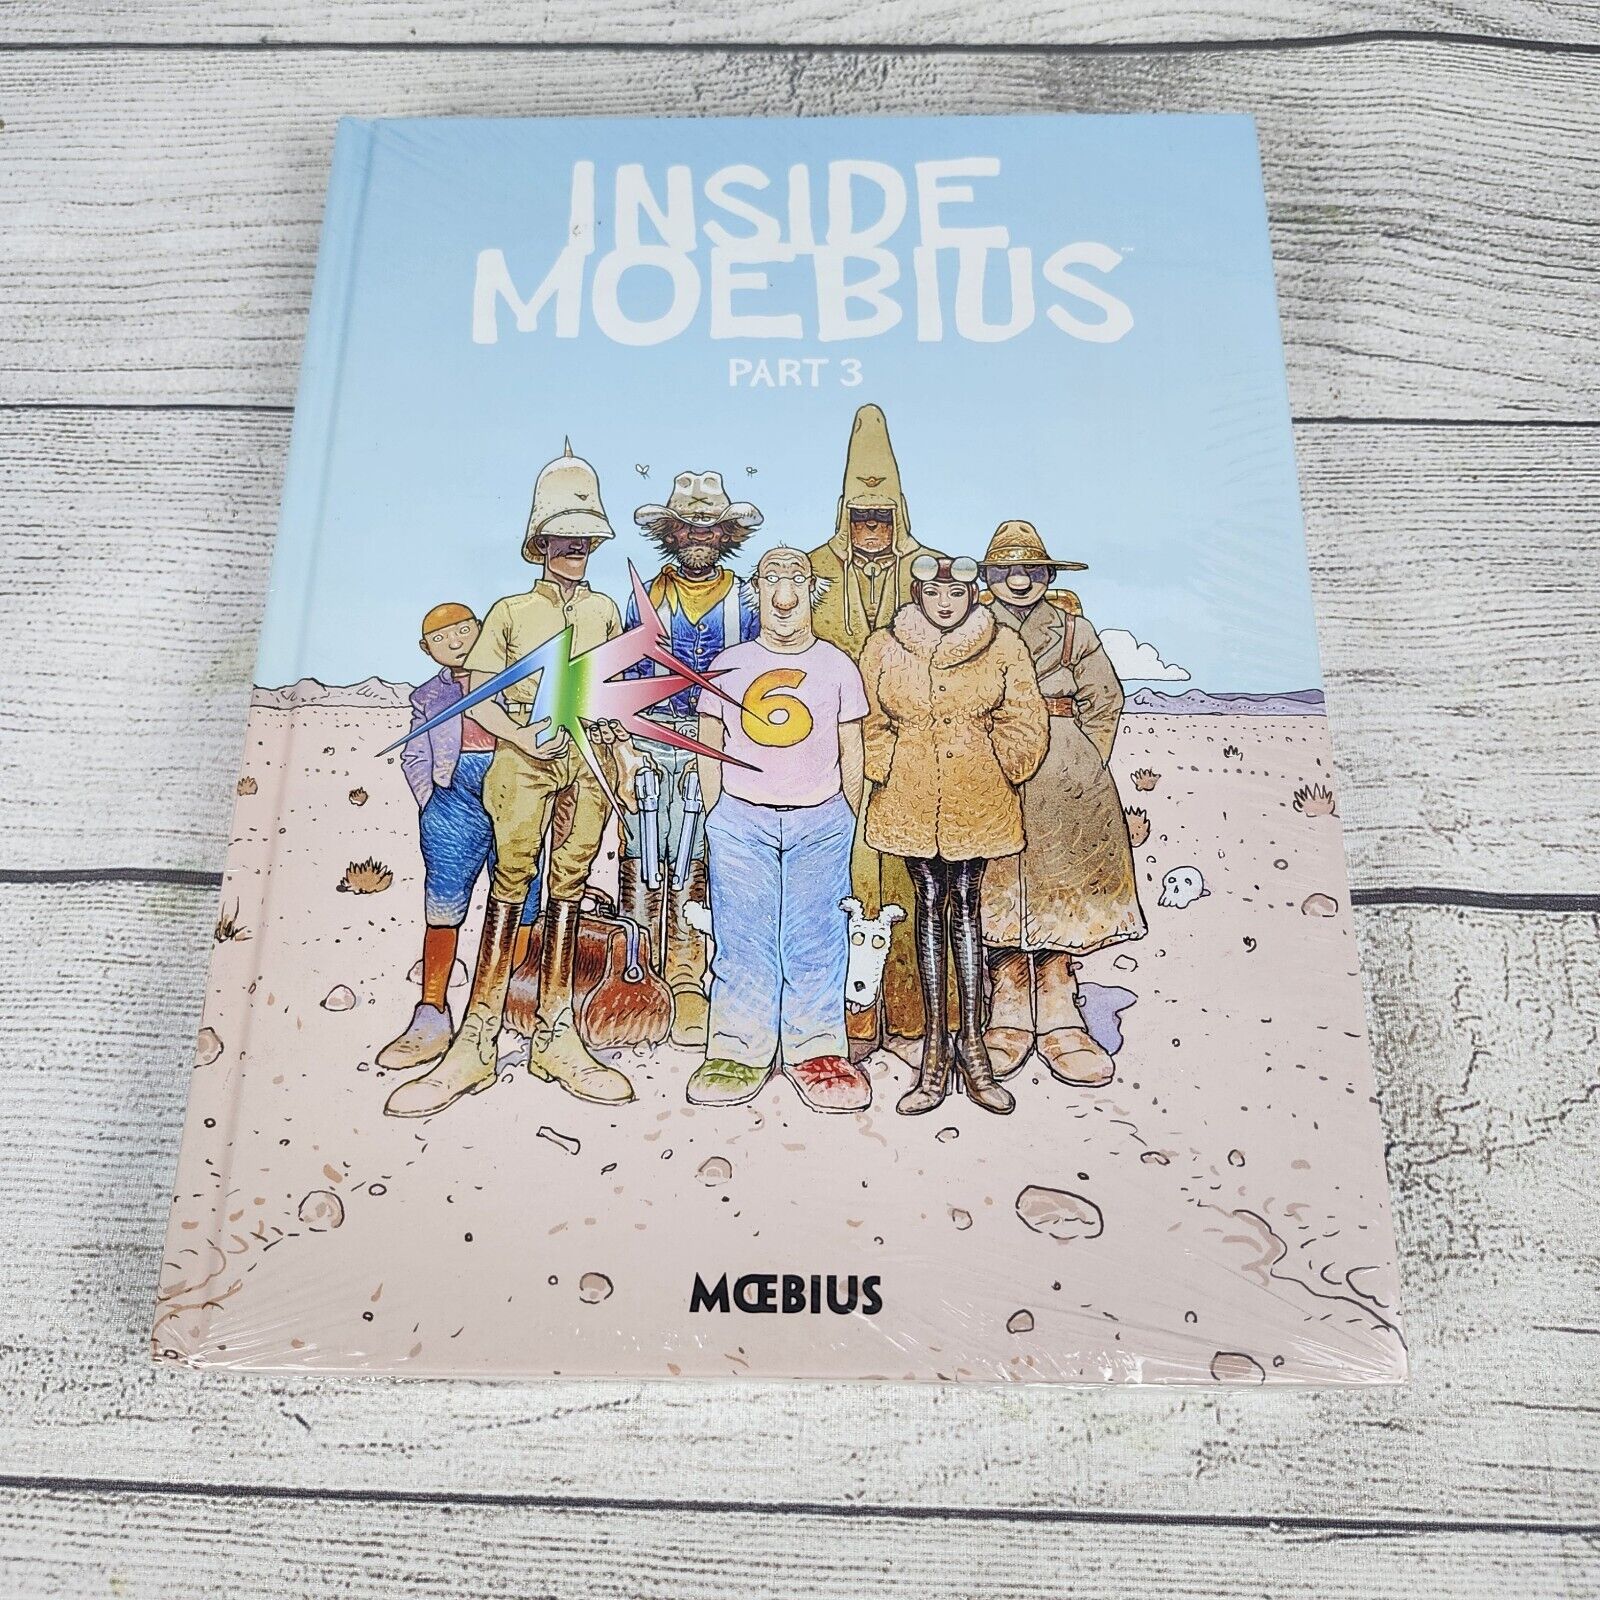 Inside Moebius 3, Hardcover by Giraud, Jean, new sealed